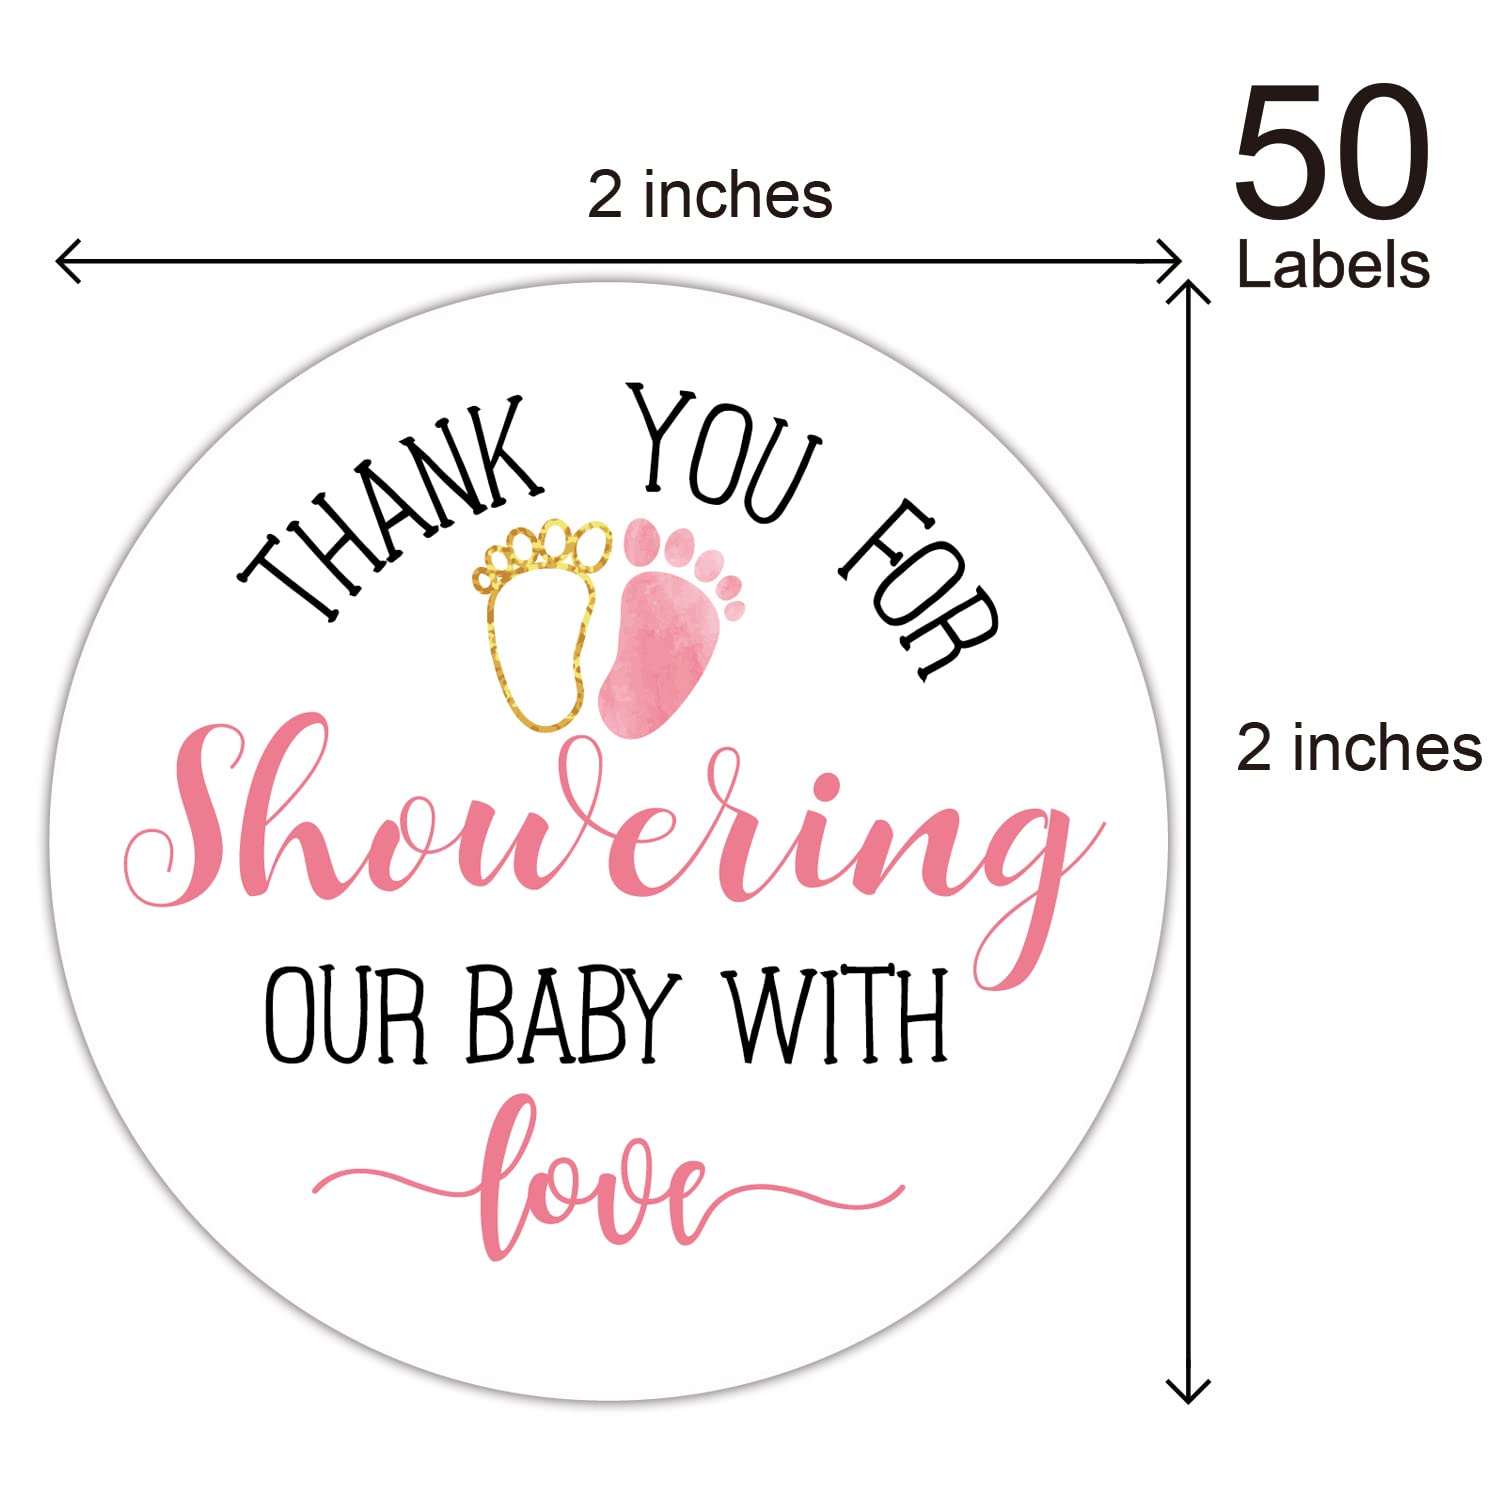 Pink Baby Shower Stickers, Thank You for Showering Our Baby with Love Stickers, Baby Shower Favors for Girls, Thank You Stickers Baby Shower, 2 Inch, Pack of 50.